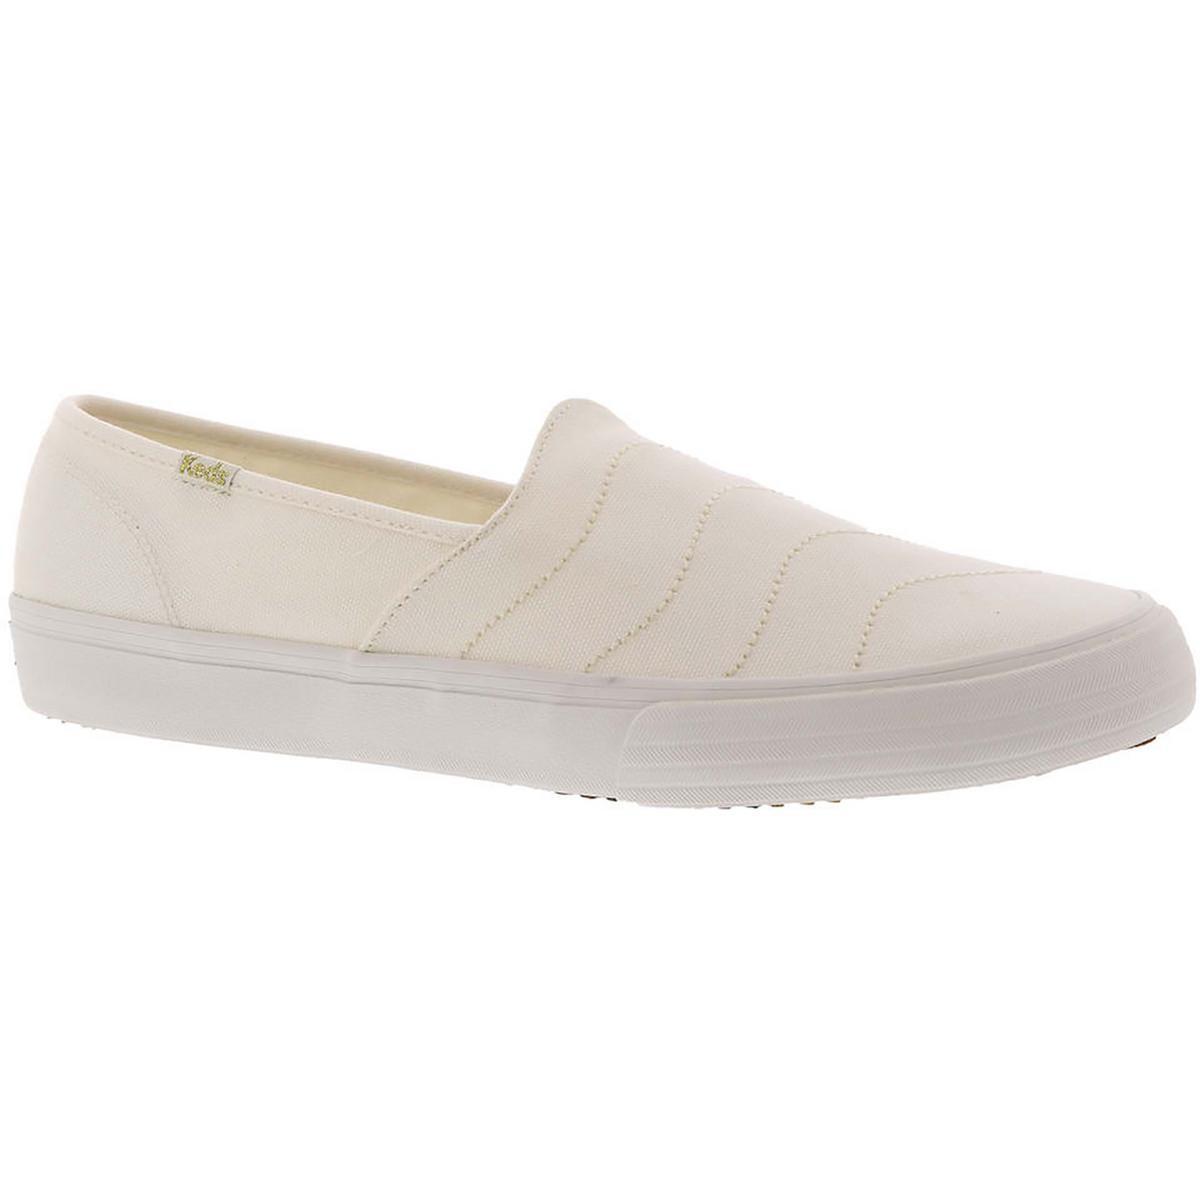 Wave Lifestyle Slip-On Sneakers Shoes